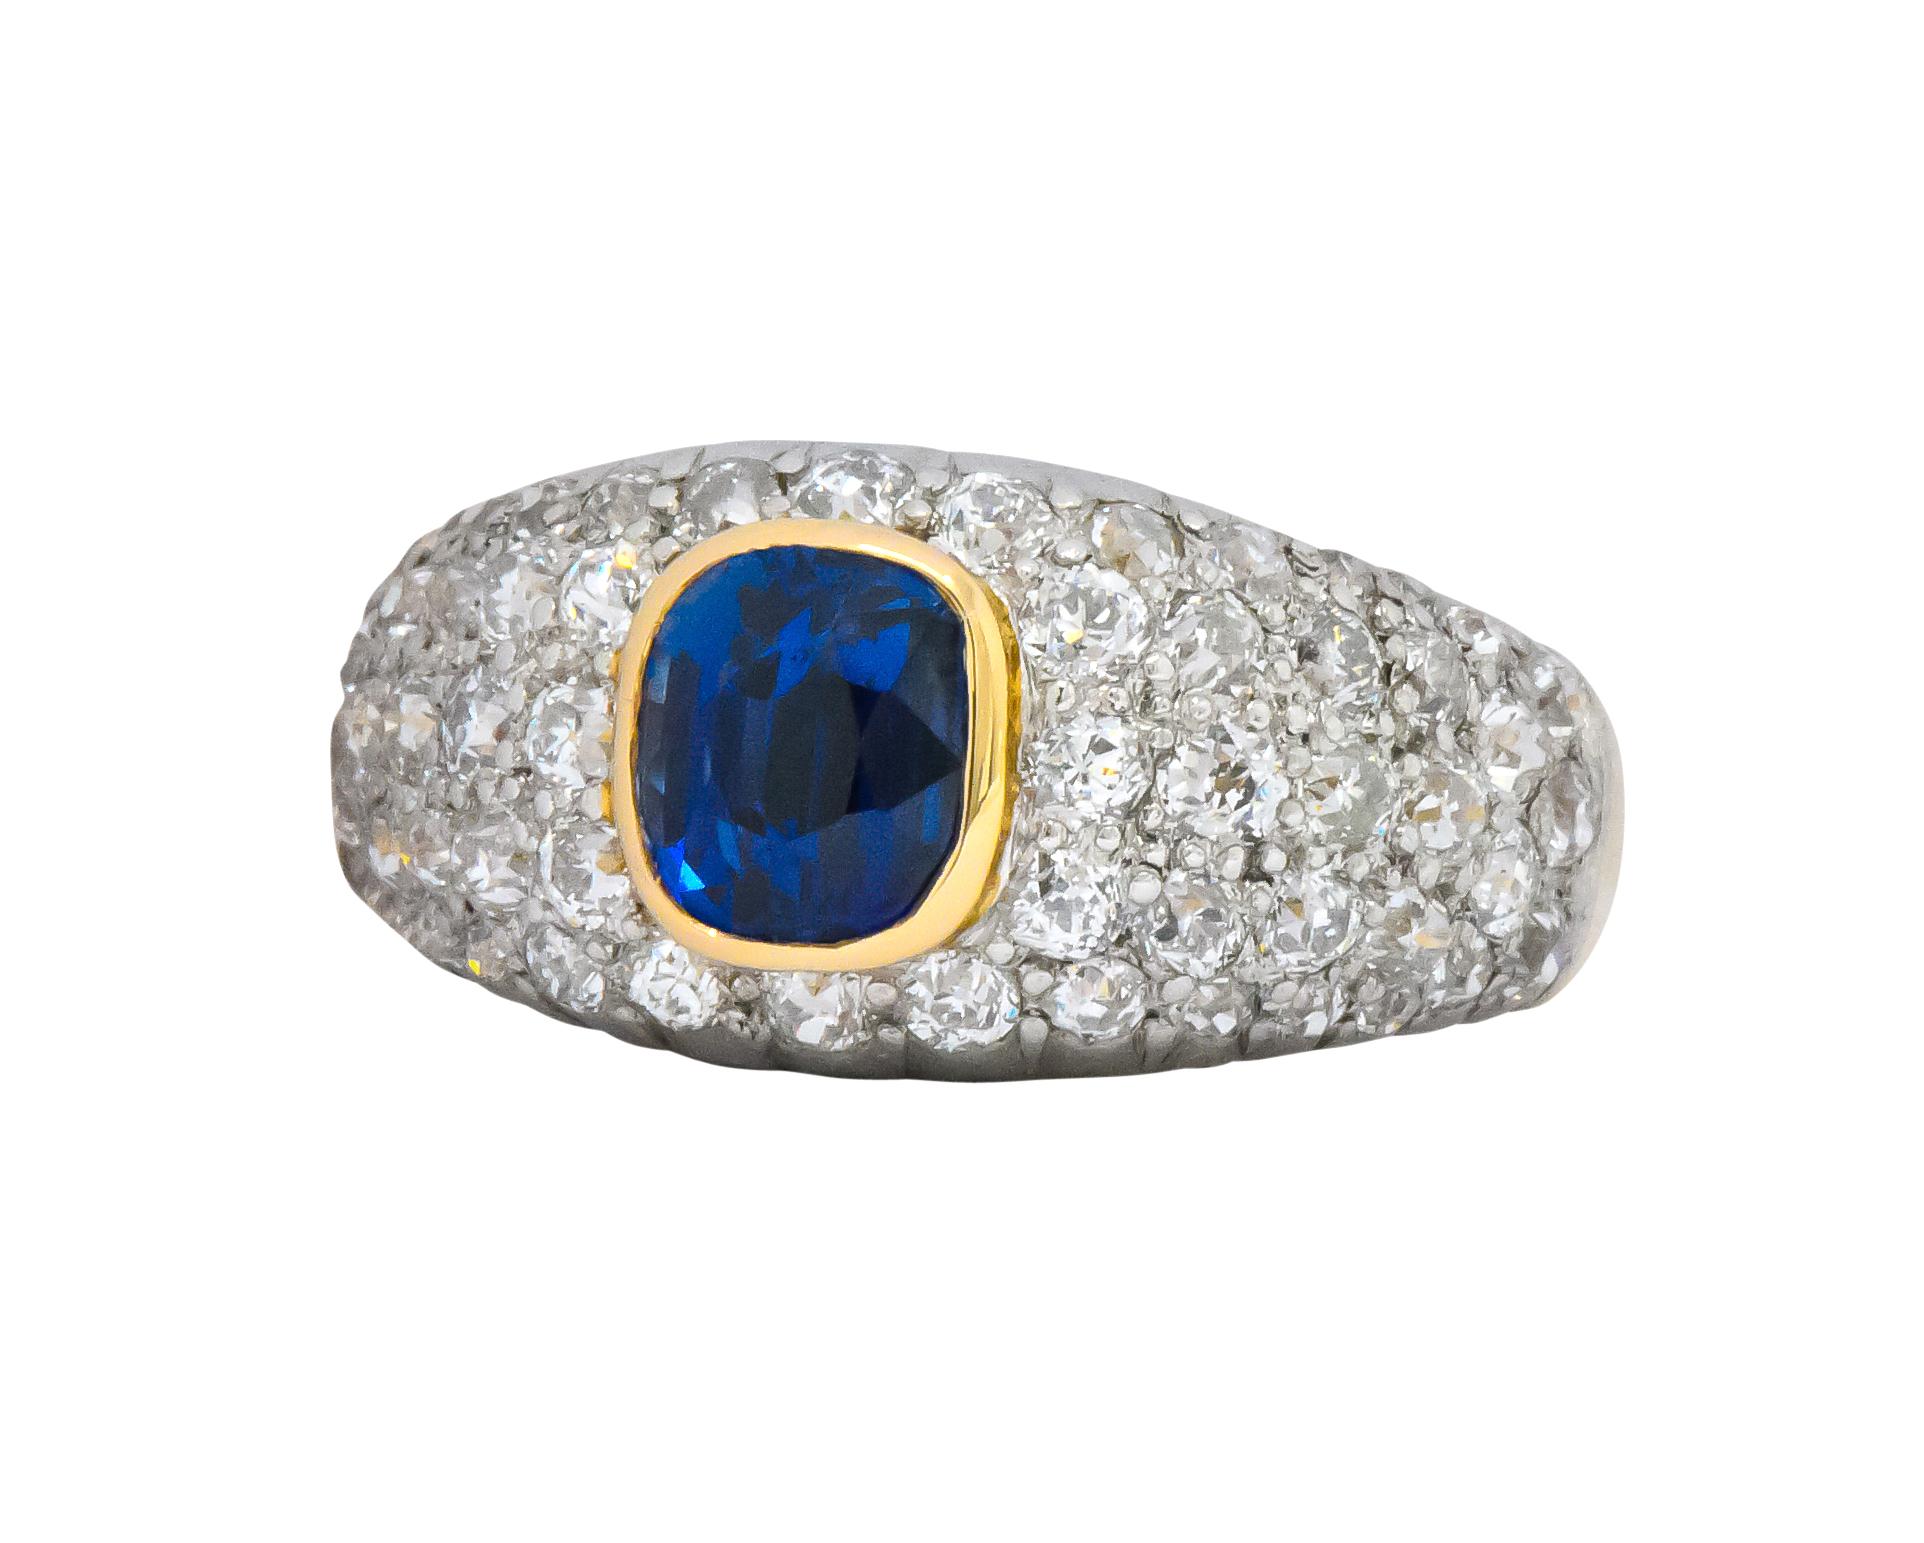 Band style ring centering a cushion cut sapphire weighing approximately 1.50 carats

Sapphire is bezel set in brightly polished gold and is transparent with striking royal blue coloring

Surrounded by pavé set round brilliant and Swiss cut diamonds